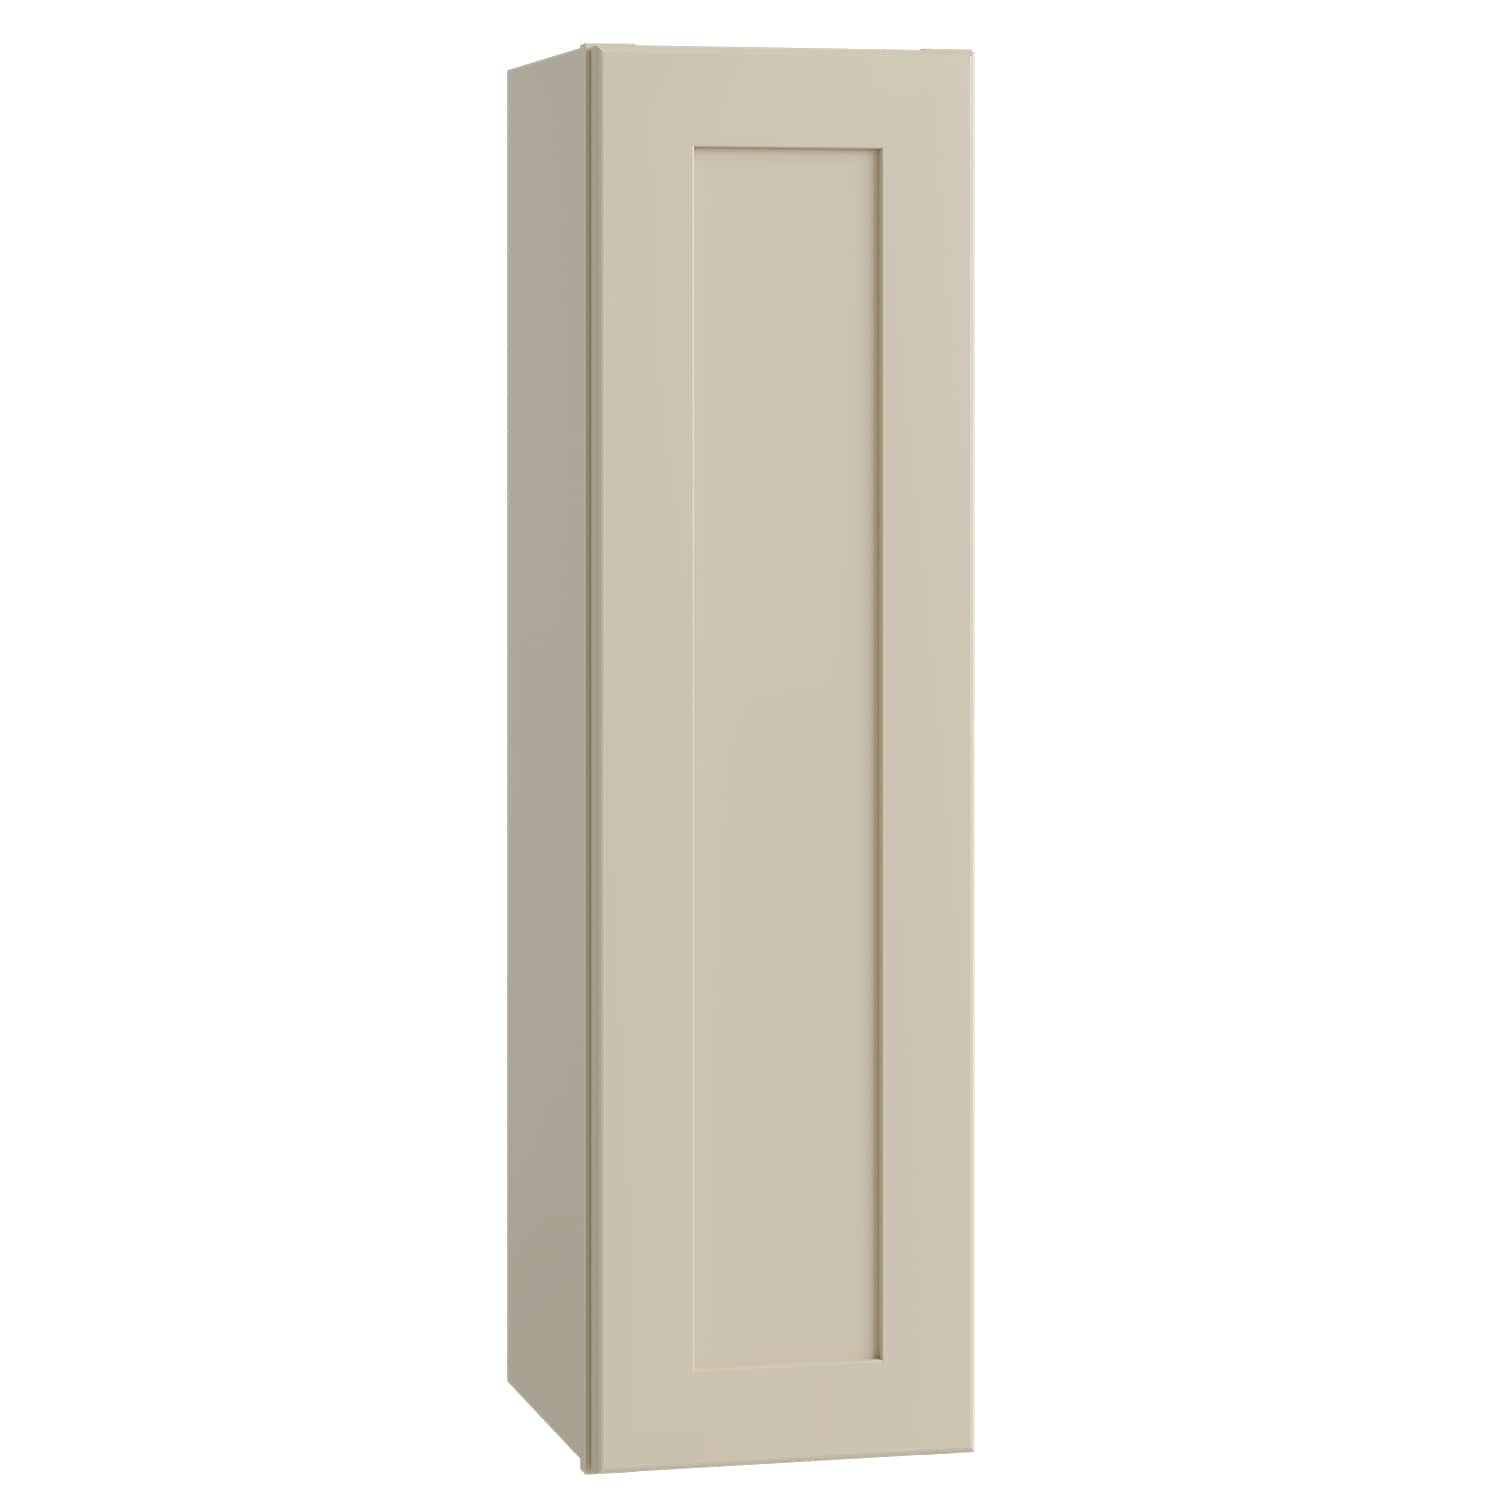 Luxxe Cabinetry 15-in W x 36-in H x 12-in D Norfolk Blended Cream Painted Door Wall Fully Assembled Semi-custom Cabinet in Off-White | W1536L-NBC